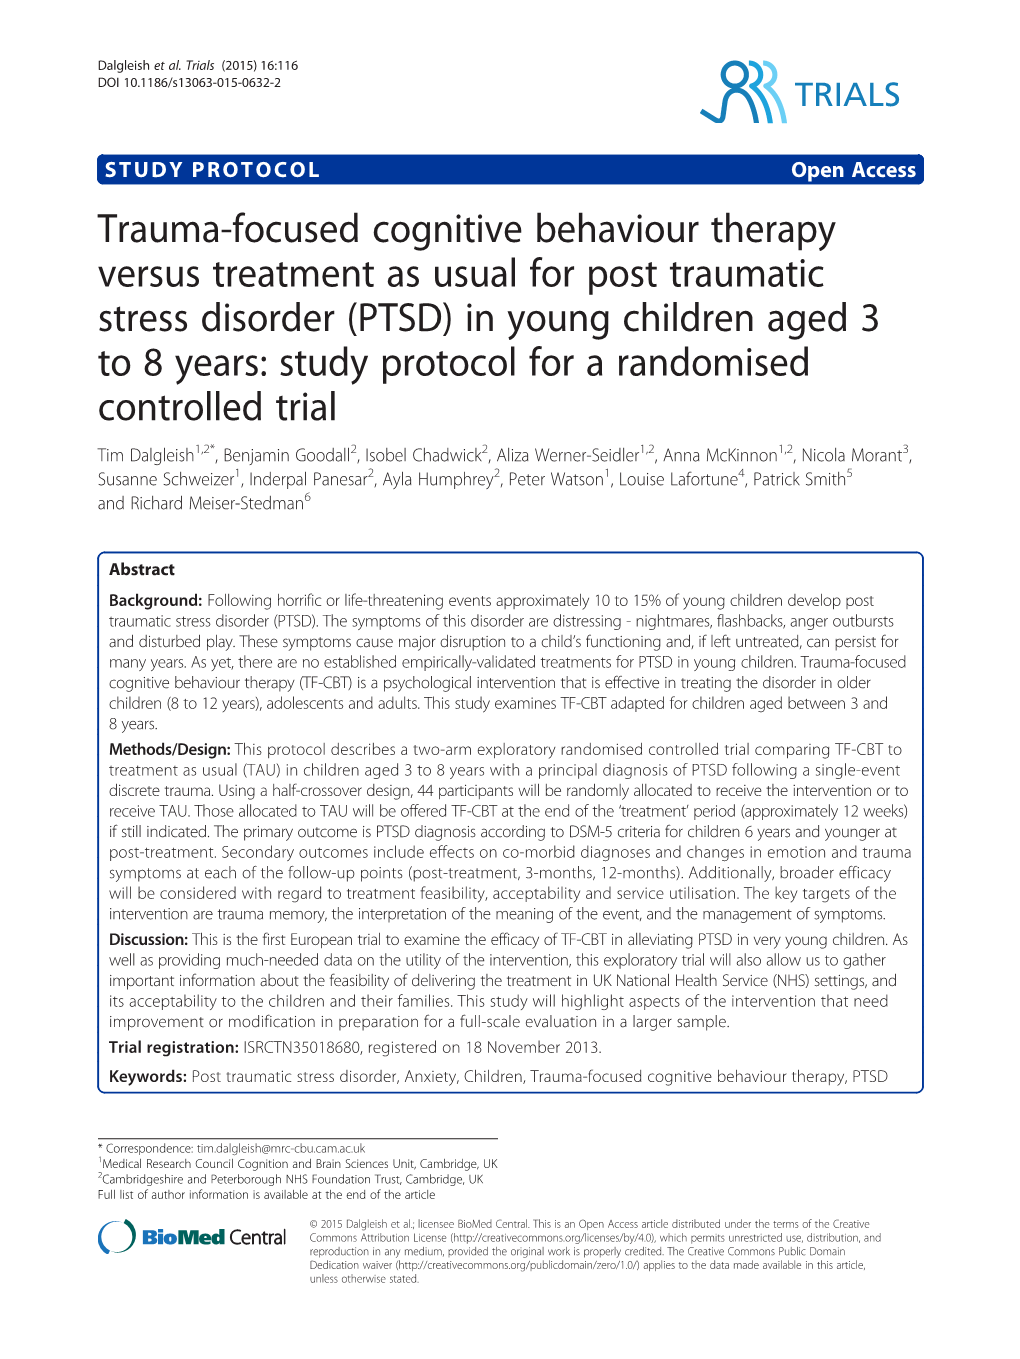 Trauma-Focused Cognitive Behaviour Therapy Versus Treatment As Usual